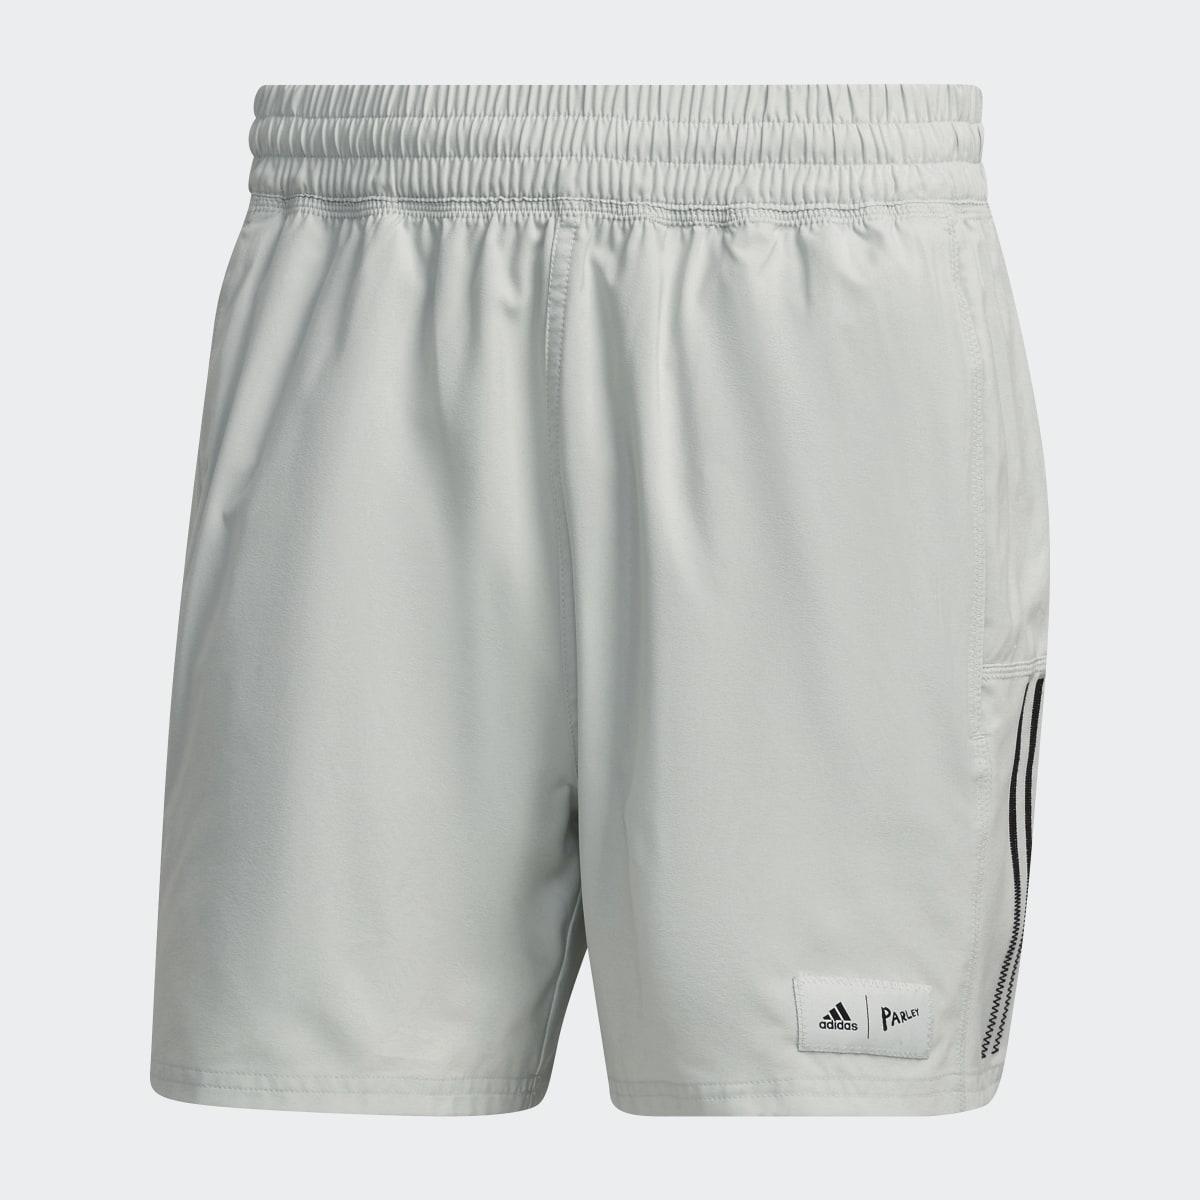 Adidas Shorts Parley Run for the Oceans. 4